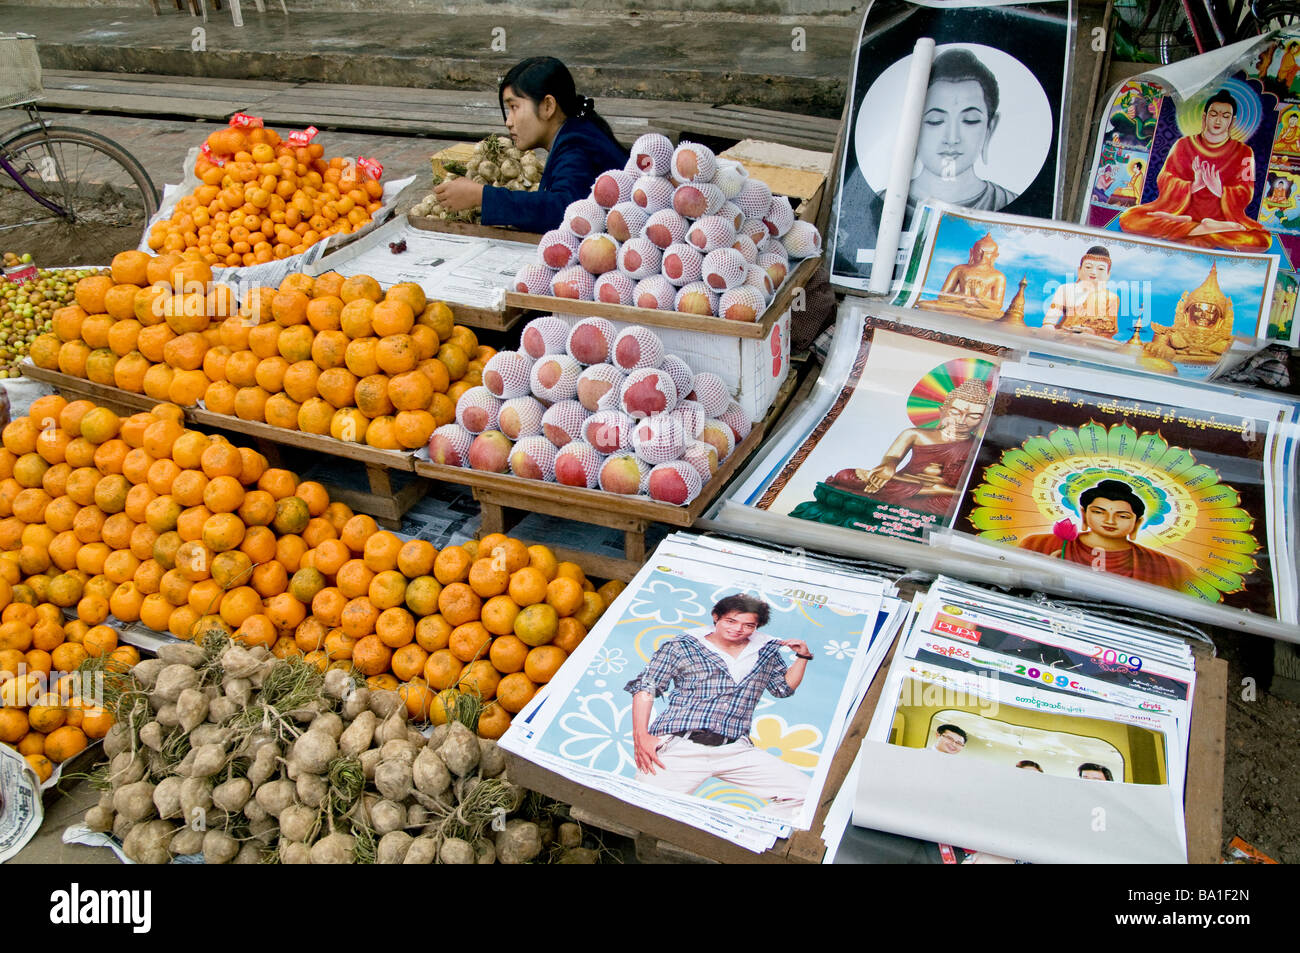 MYANMAR/BURMA. FRUIT AND POSTER VENDOR IN THE MARKET IN KATHA WHERE GEORGE ORWELL S BURMESE DAYS WAS SET Photo Julio Etchart Stock Photo